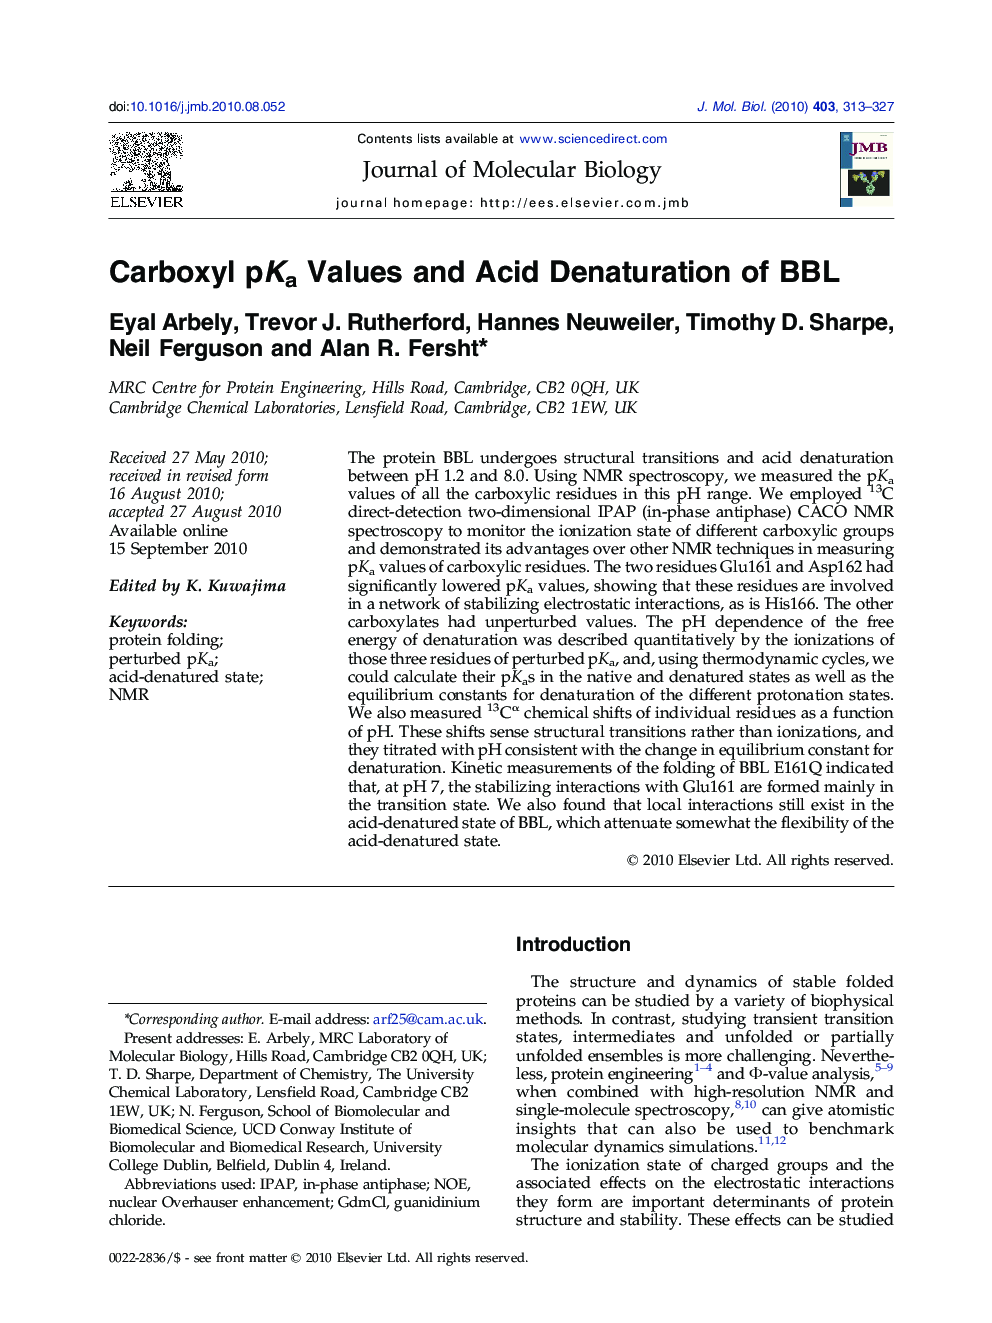 Carboxyl pKa Values and Acid Denaturation of BBL